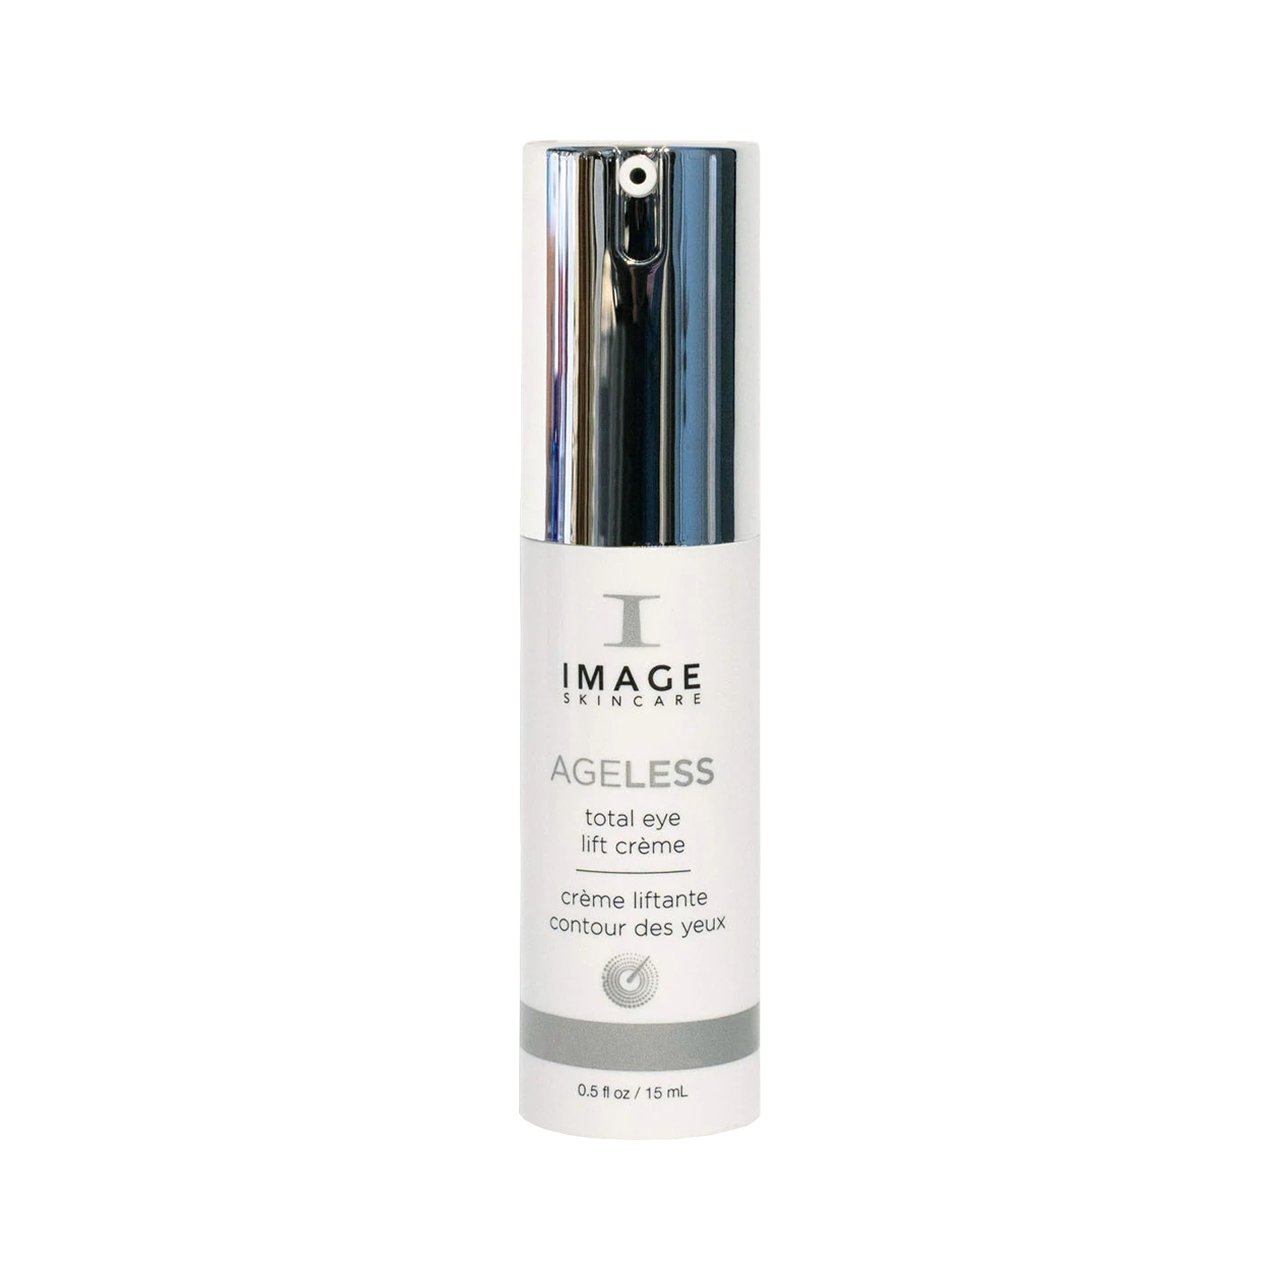 Image Skincare Ageless Total Eye Lift Creme - 0.5 oz (A-204N) Questions & Answers